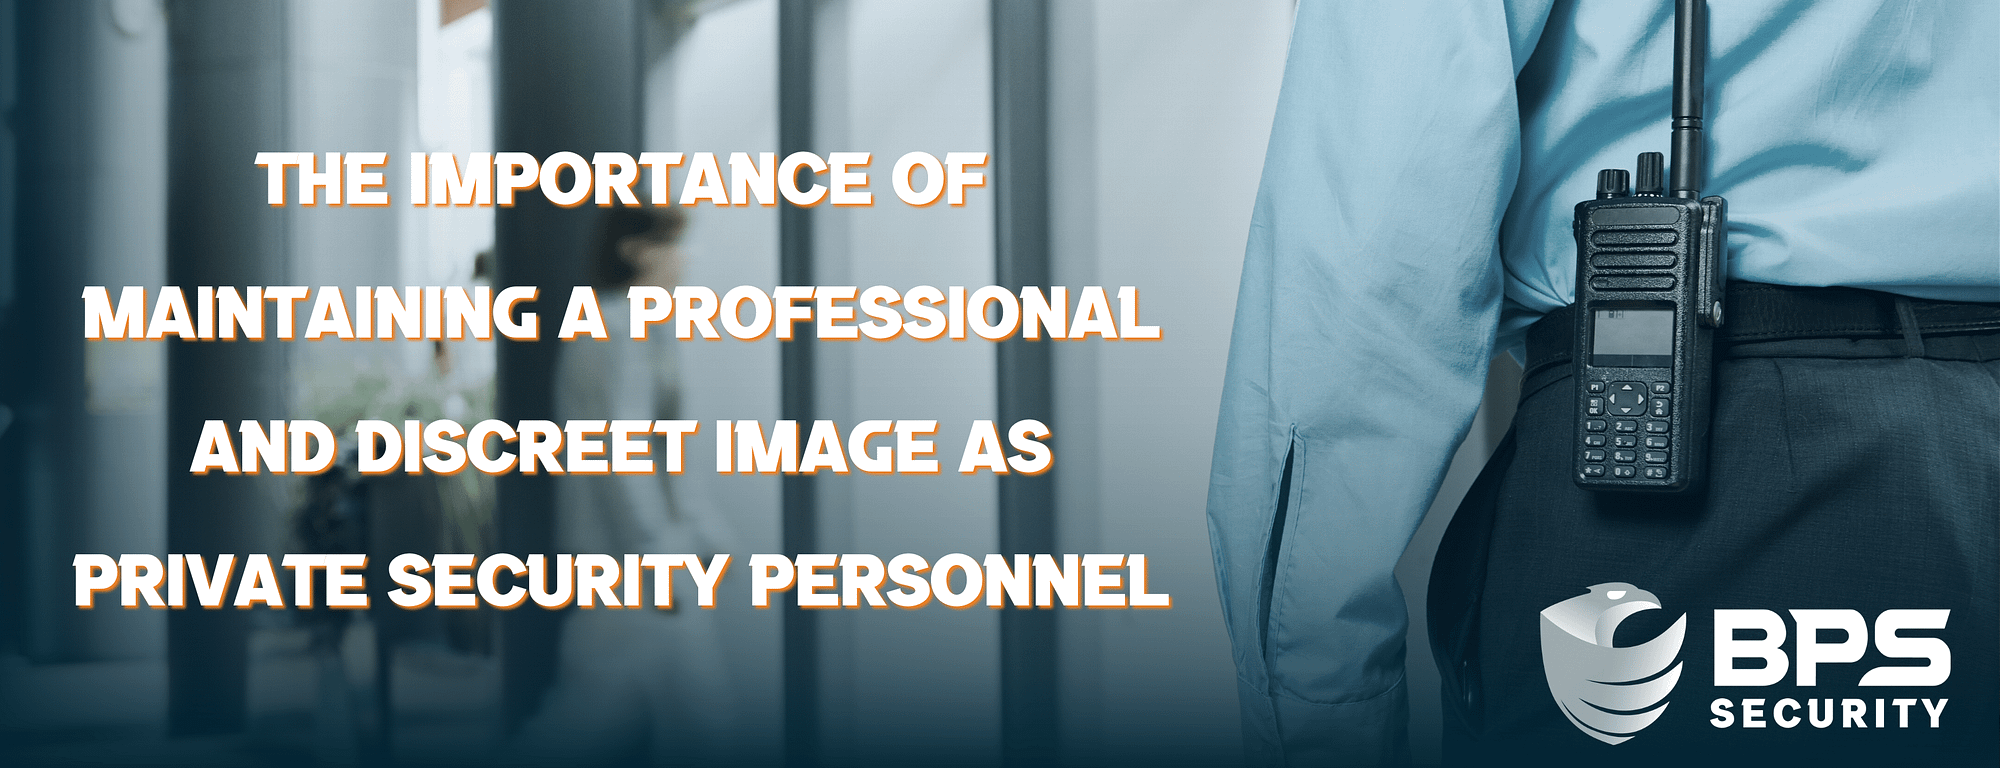 This is the header image for the BPS Security blog titled, “The Importance of Maintaining a Professional and Discreet Image as Private Security Personnel” This image shows the title next to the back view of a security.